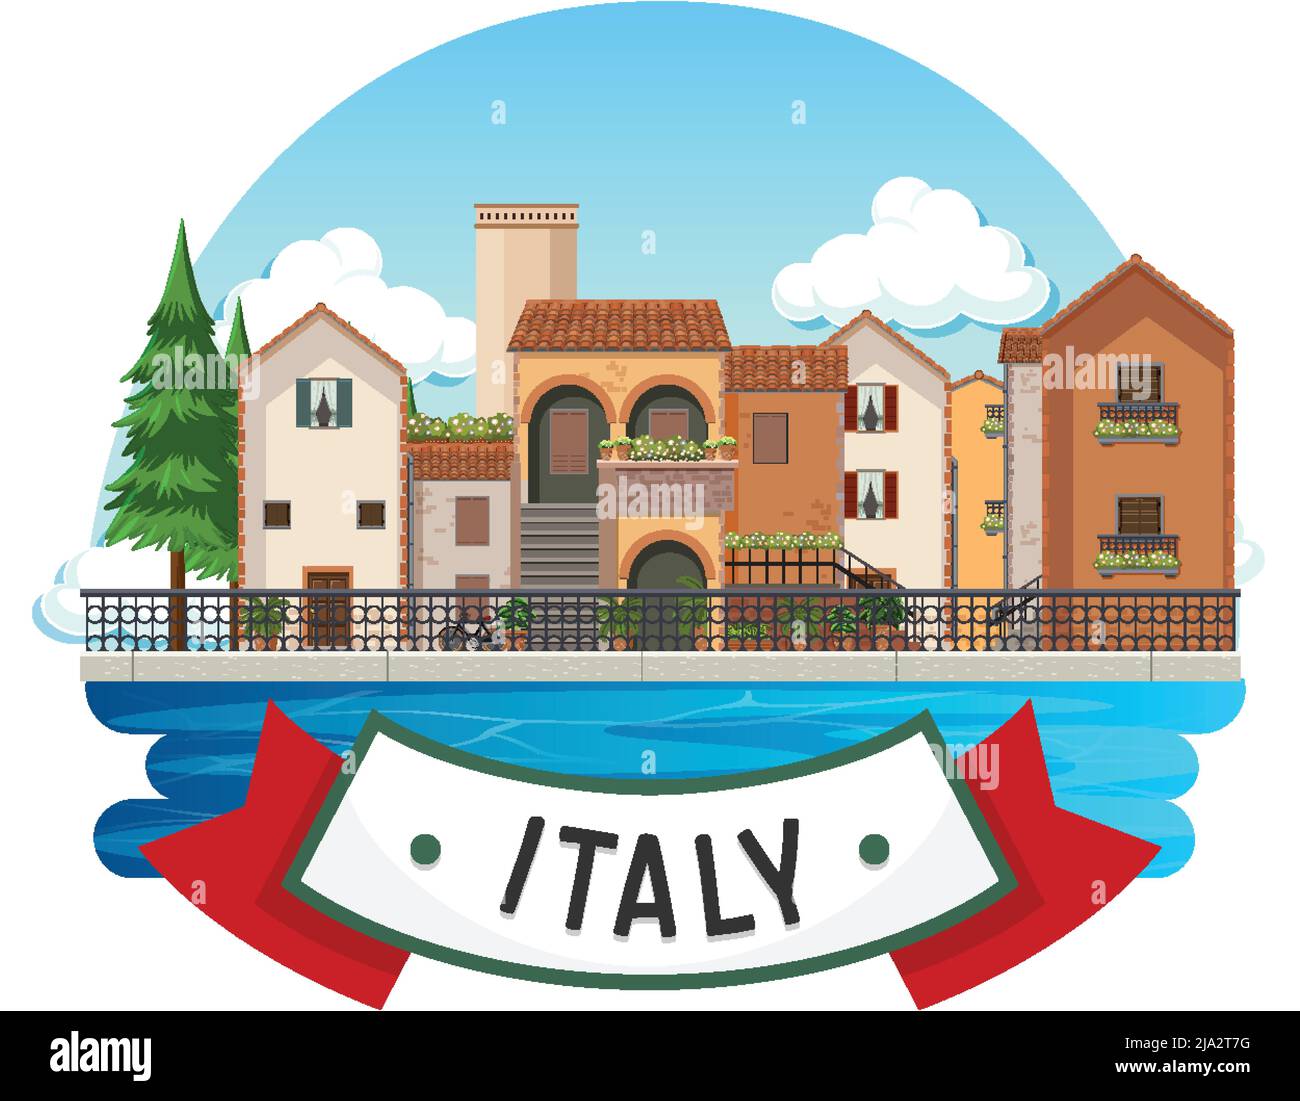 Italy banner label with house buildings illustration Stock Vector Image ...